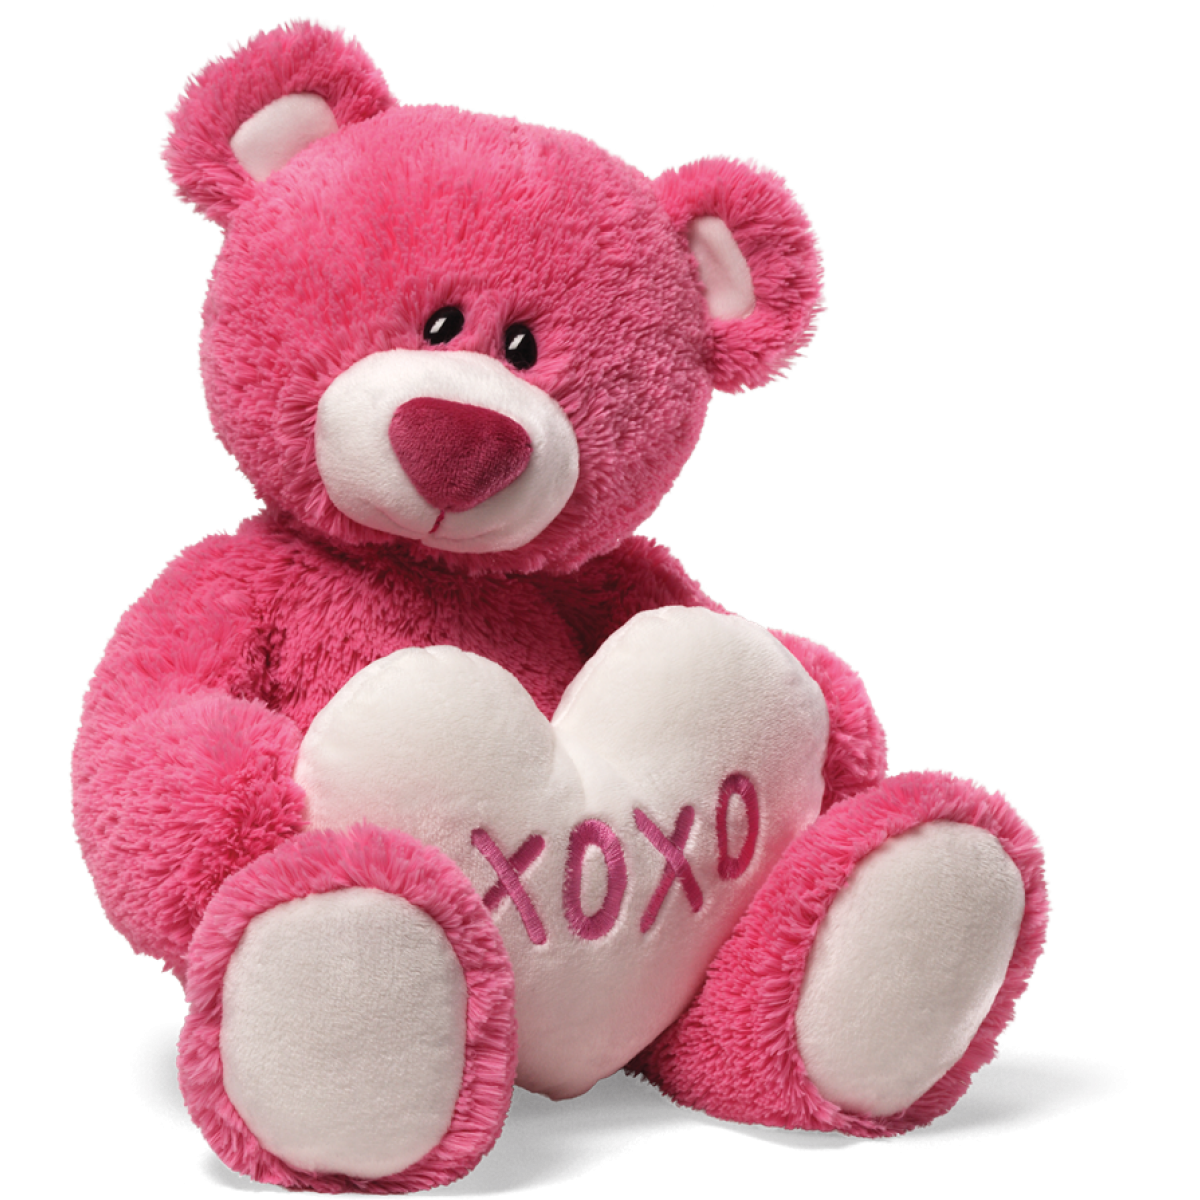 Download PNG image - Teddy Bear Png Hd, Teddy Bear PNG HD - Free PNG